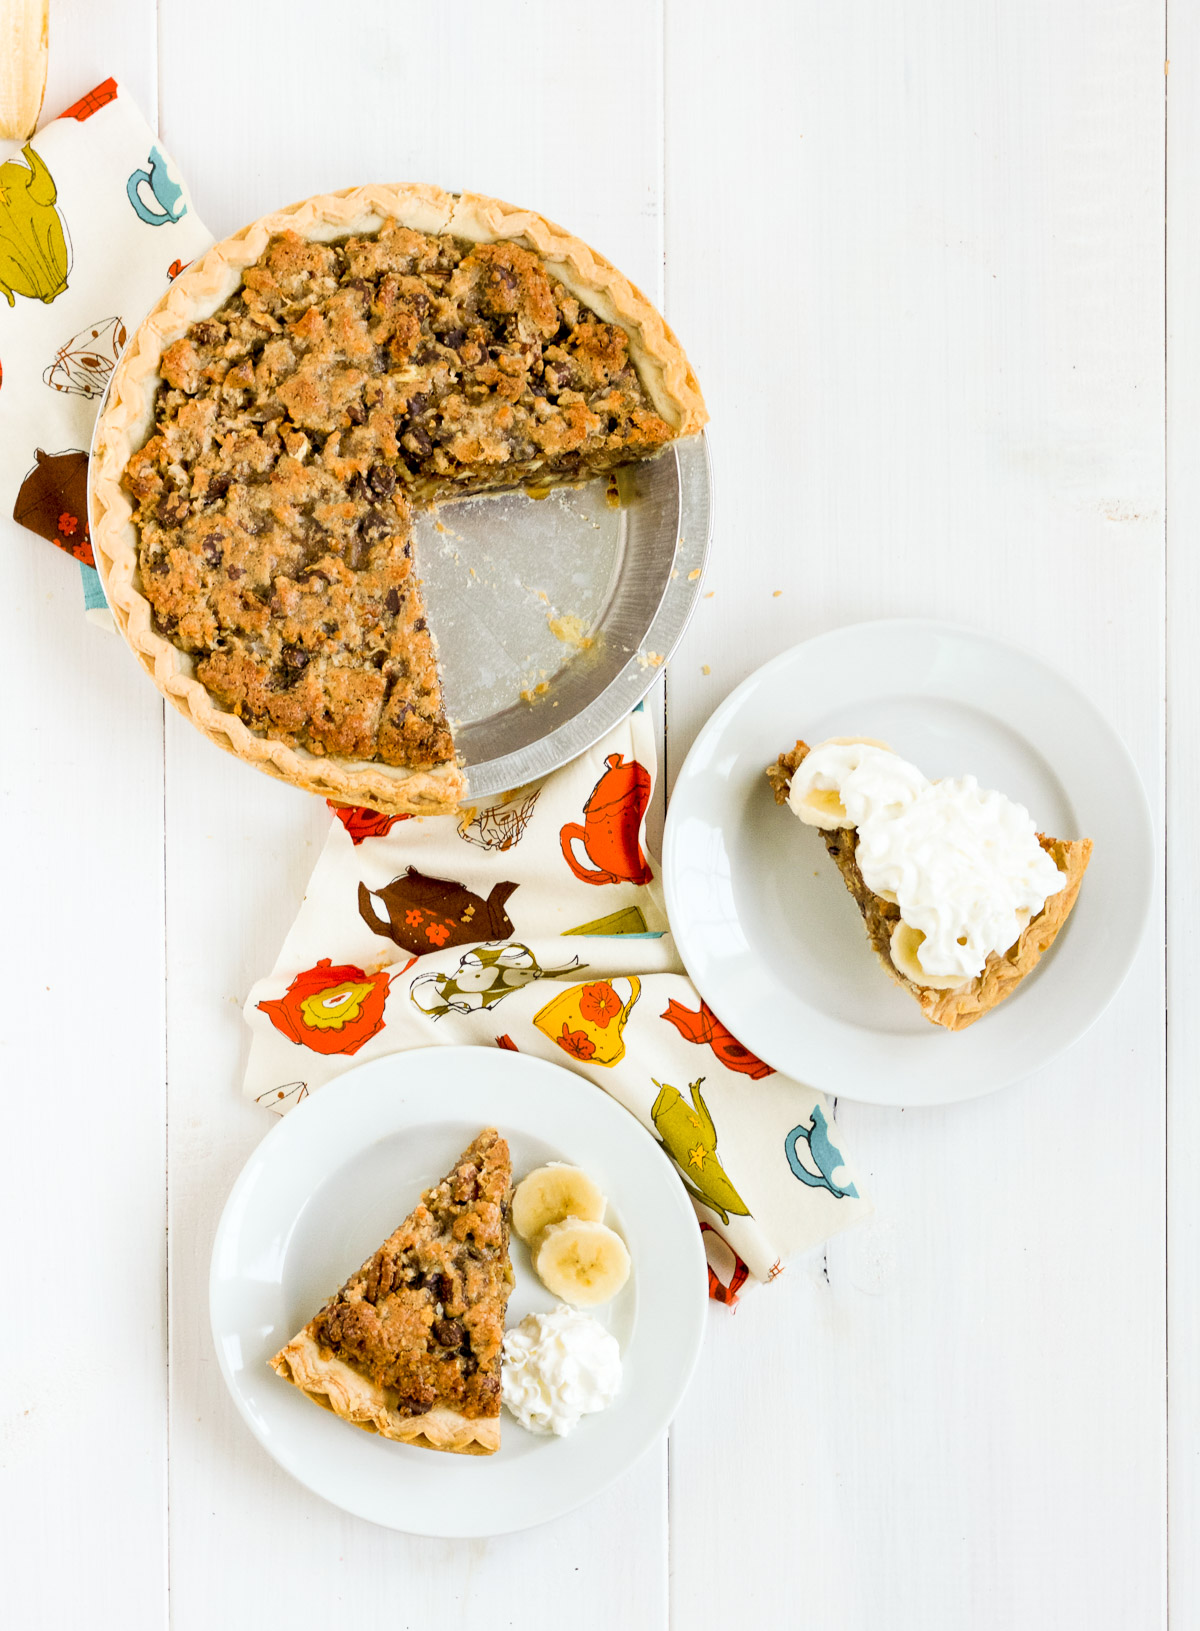 Coconut, chocolate chips, pecans, and graham crackers make this pie delicious!